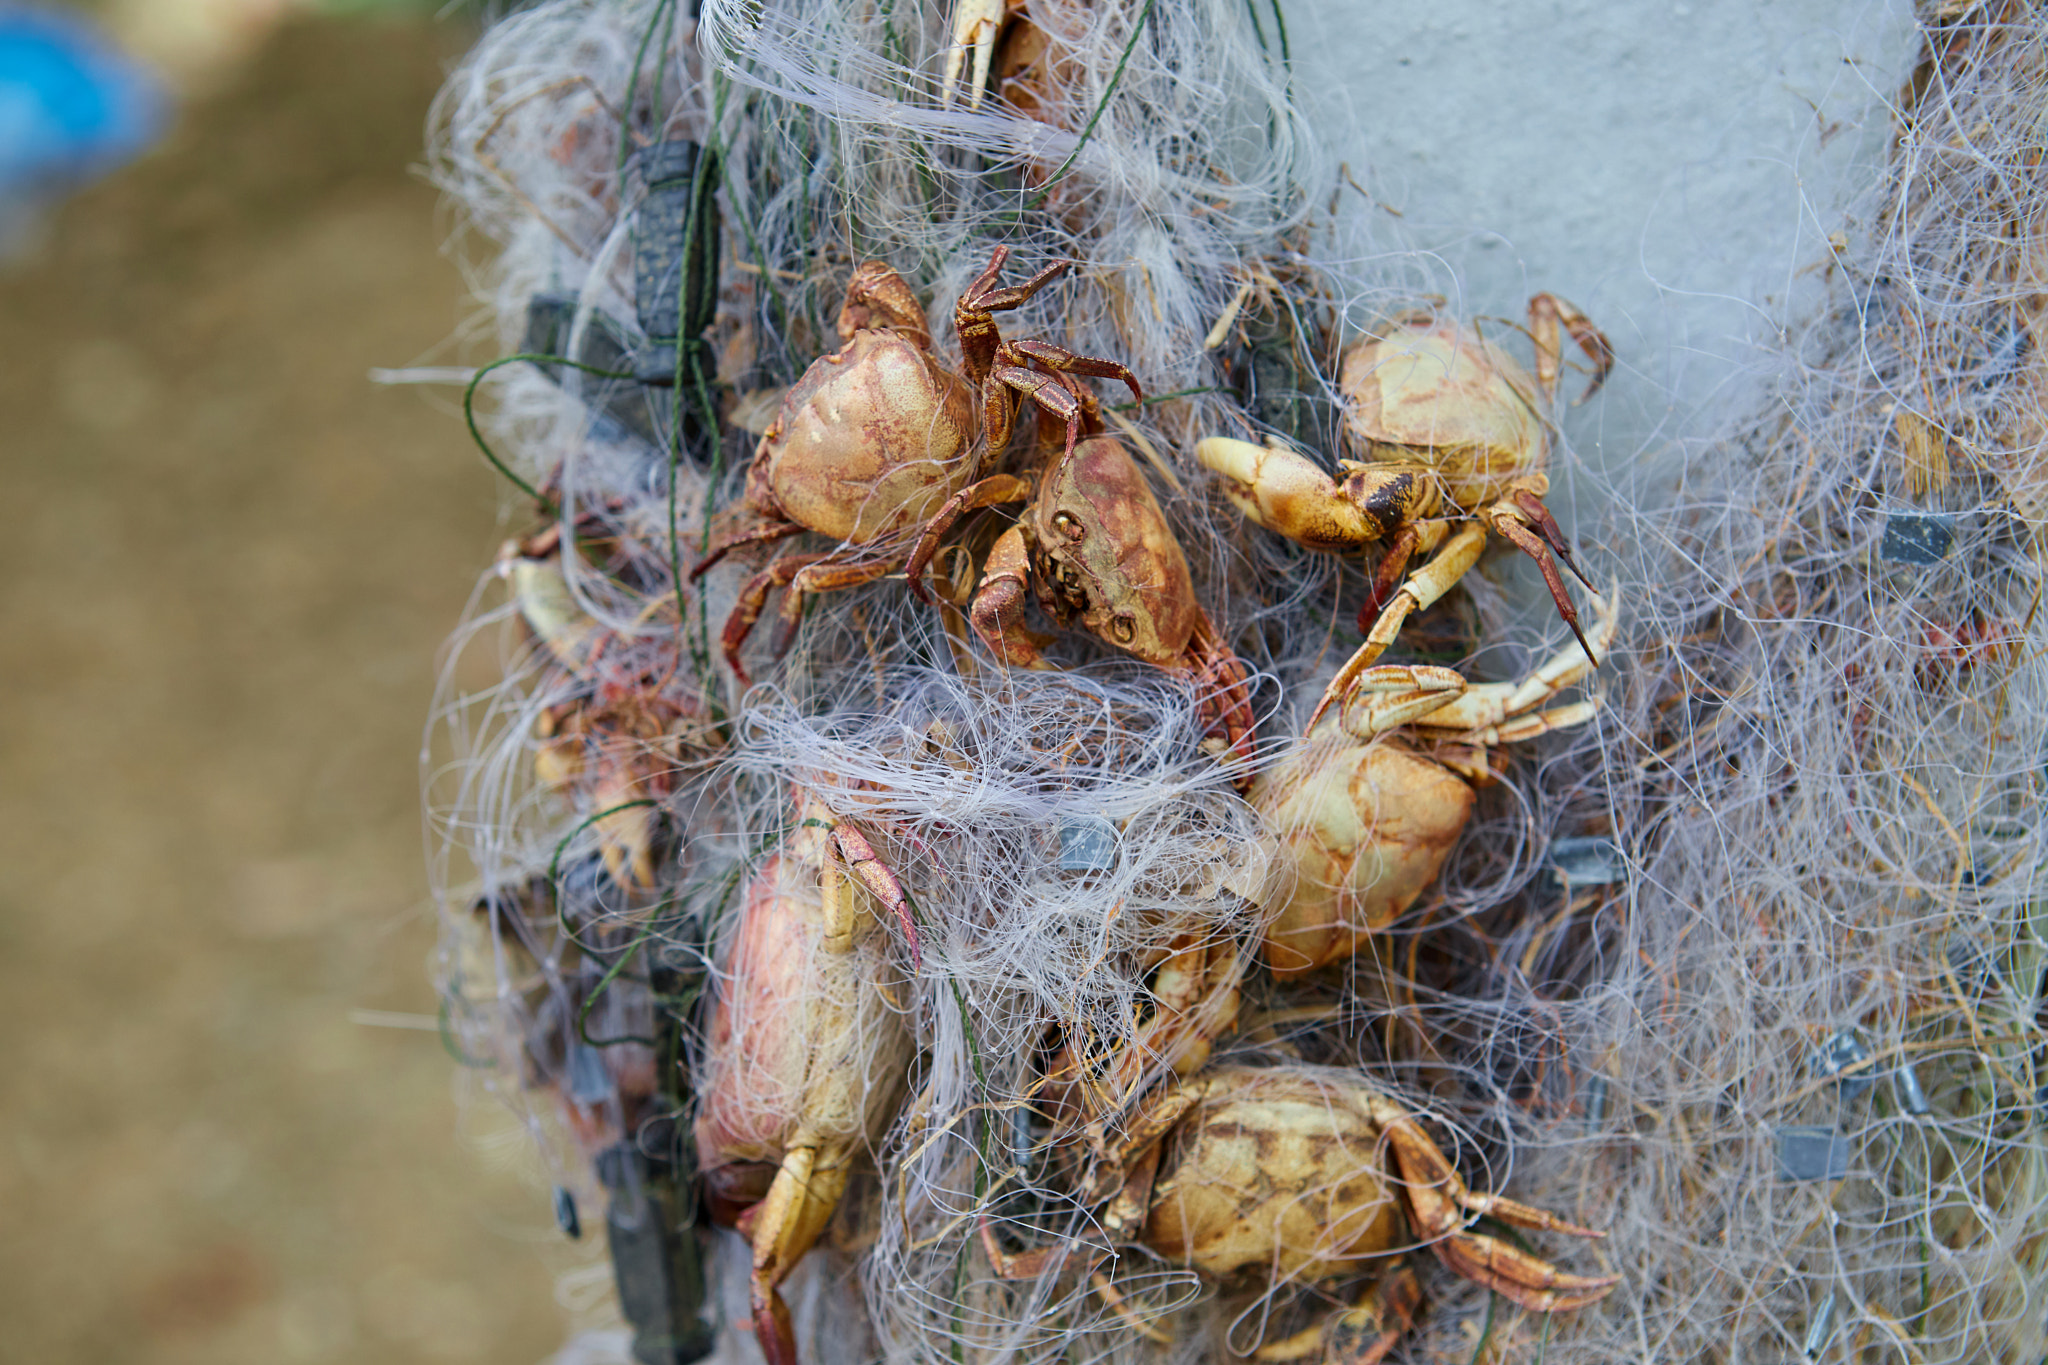 The corpse of death crab stuck on fishing net 